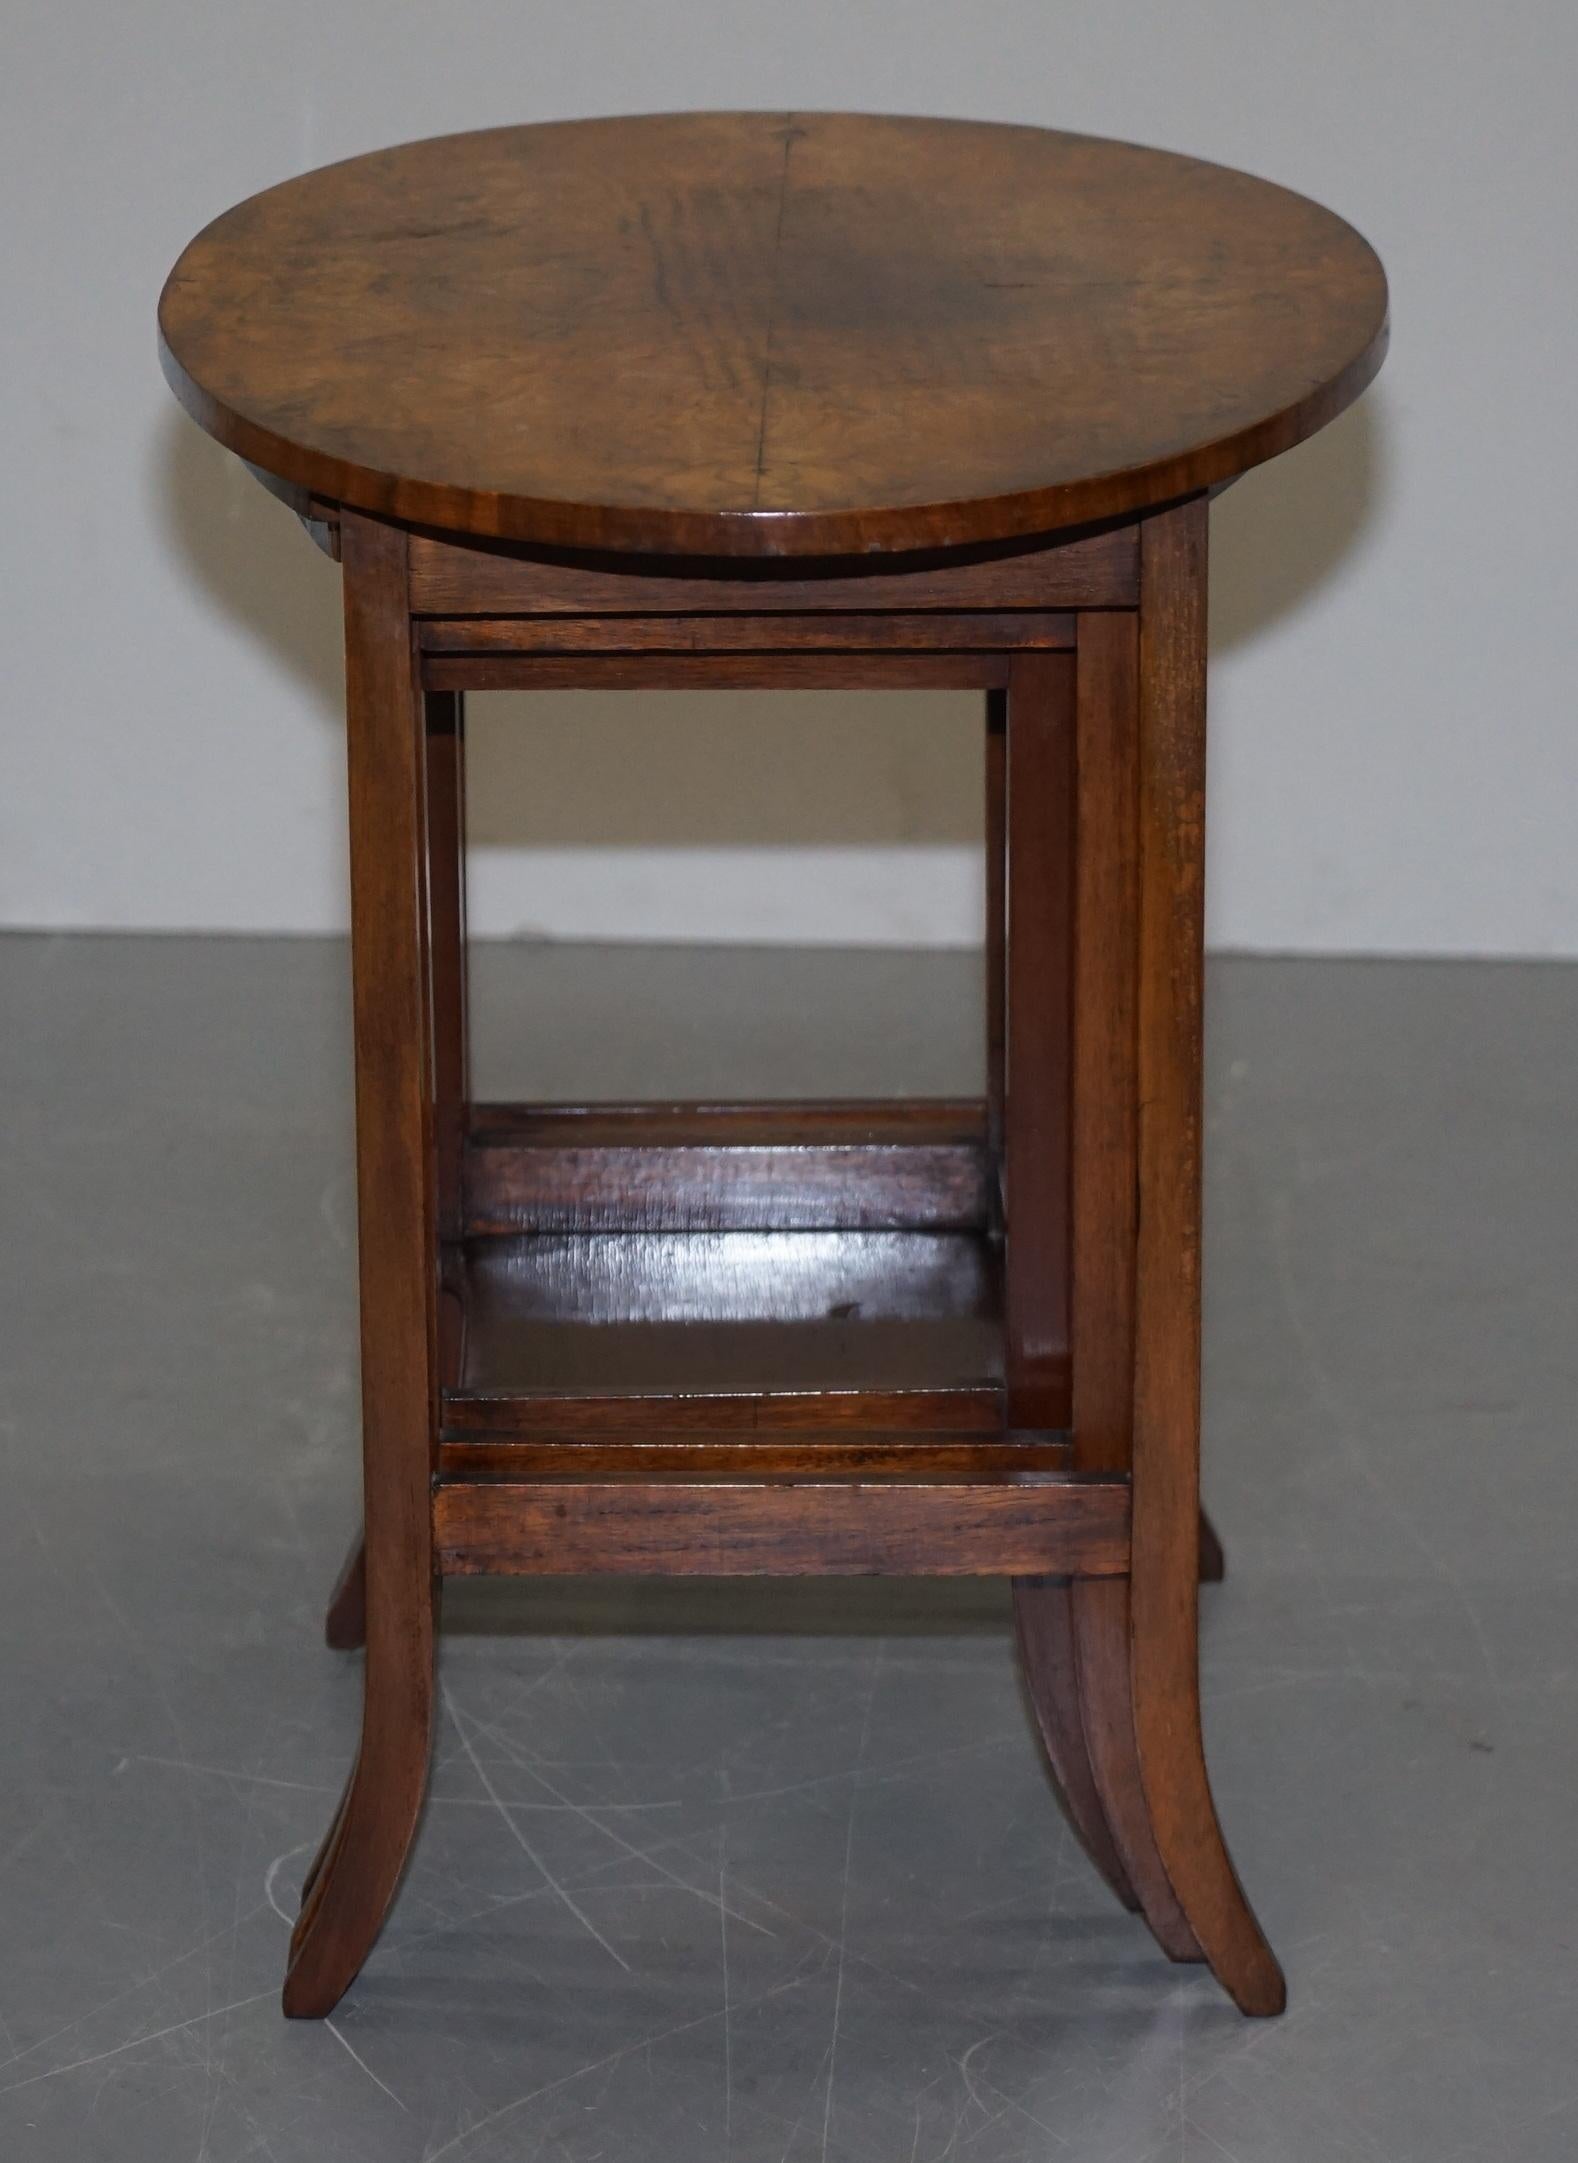 Lovely circa 1900 Late Victorian Burr Walnut Nest of Tables with Oval Main Piece For Sale 2